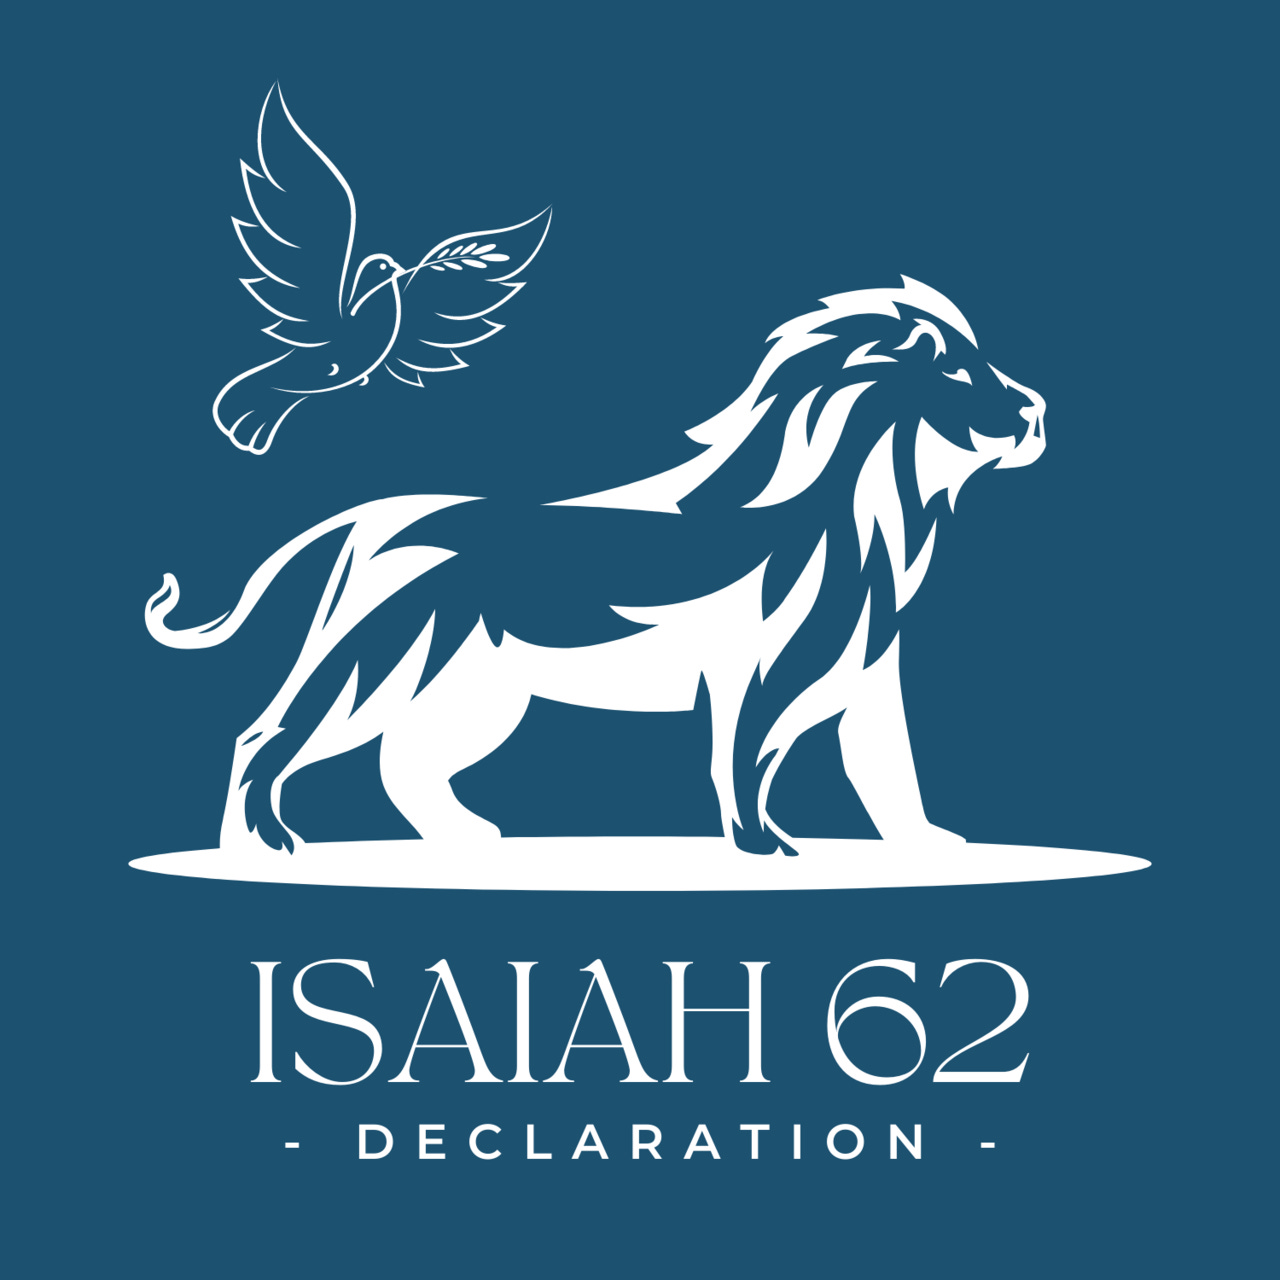 Artwork for The Isaiah 62 Declaration